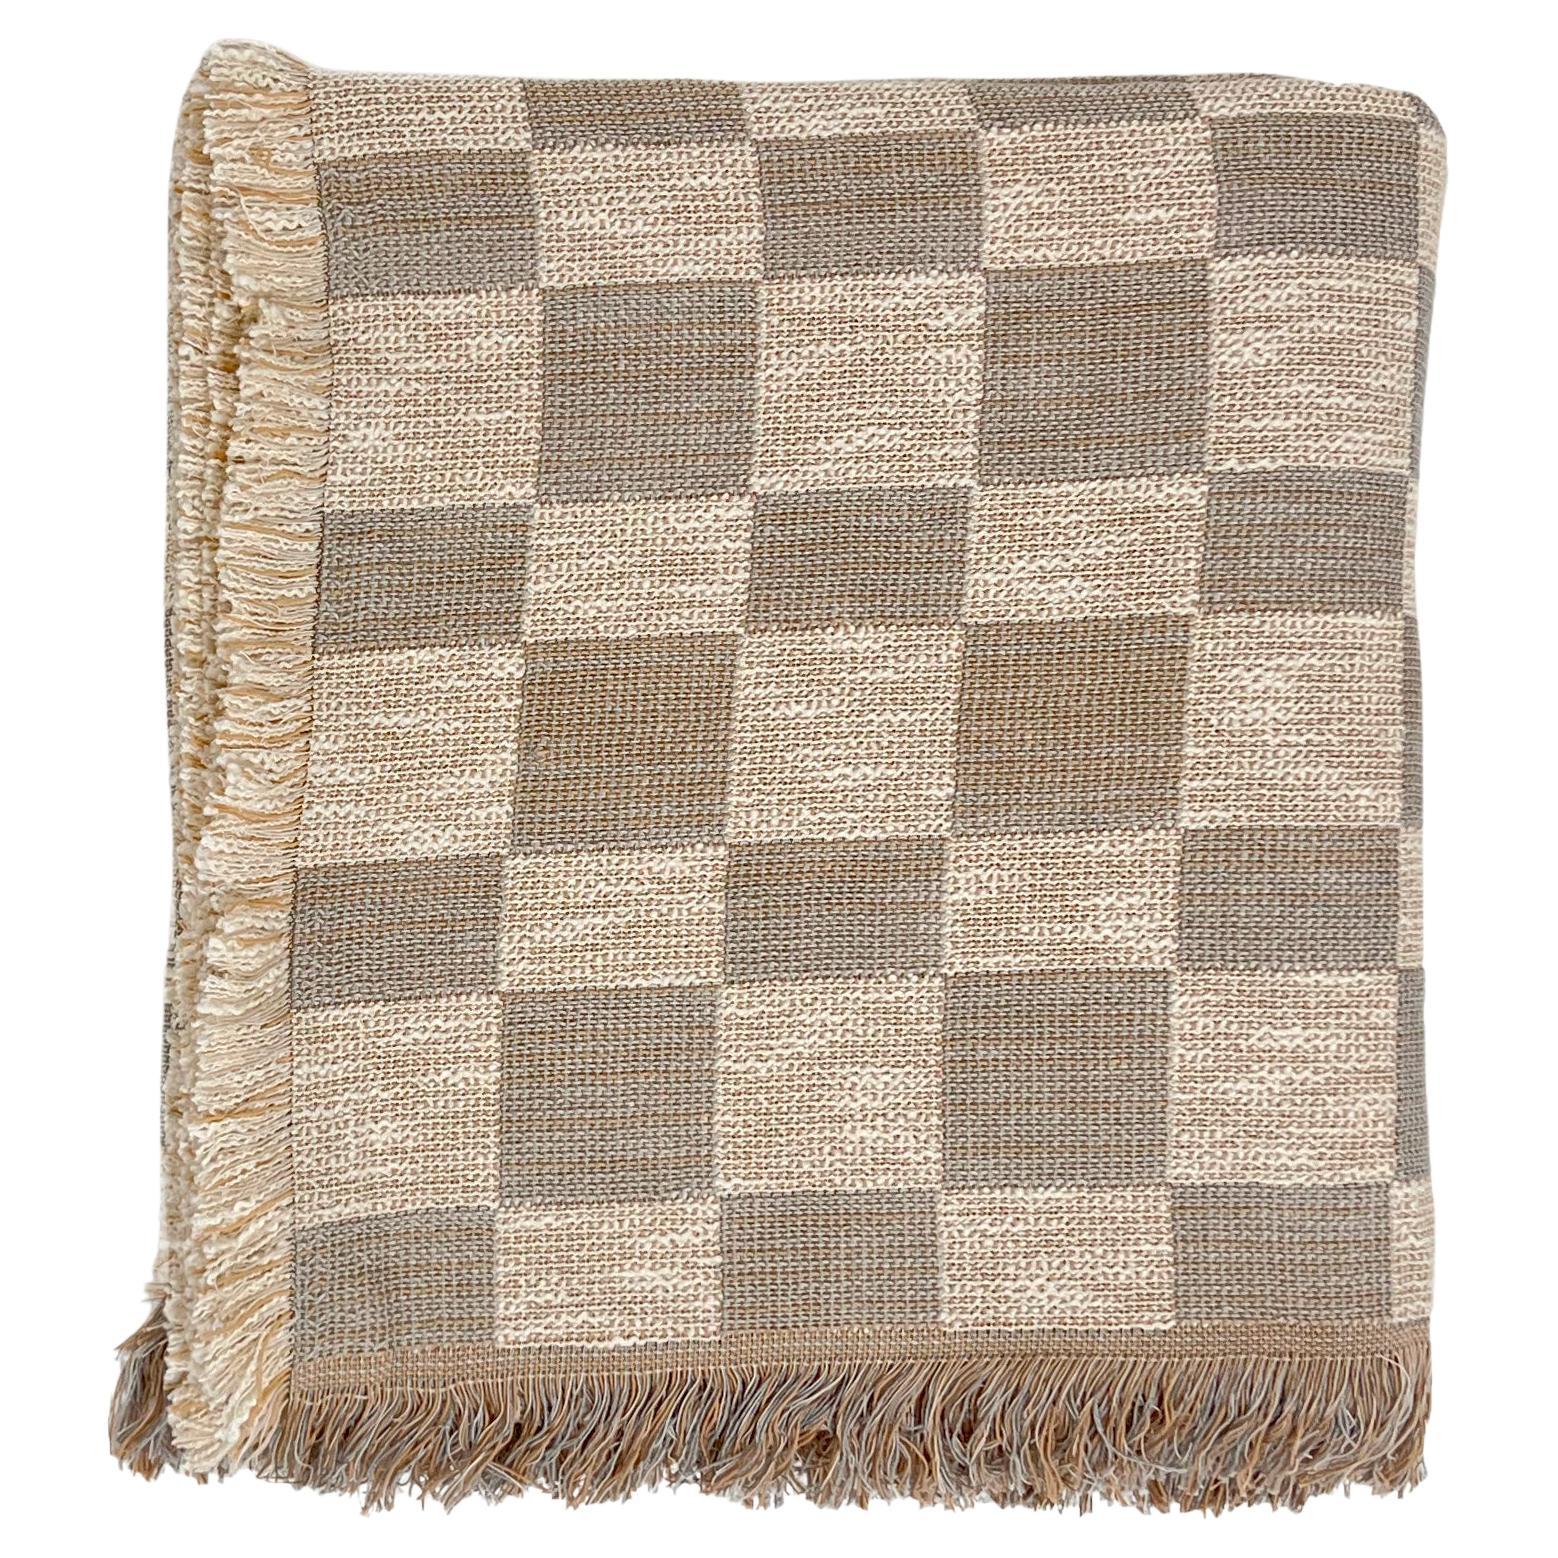 Patterned Woven Cotton Throw Blanket by Folk Textiles (Mariana / Stone) For Sale